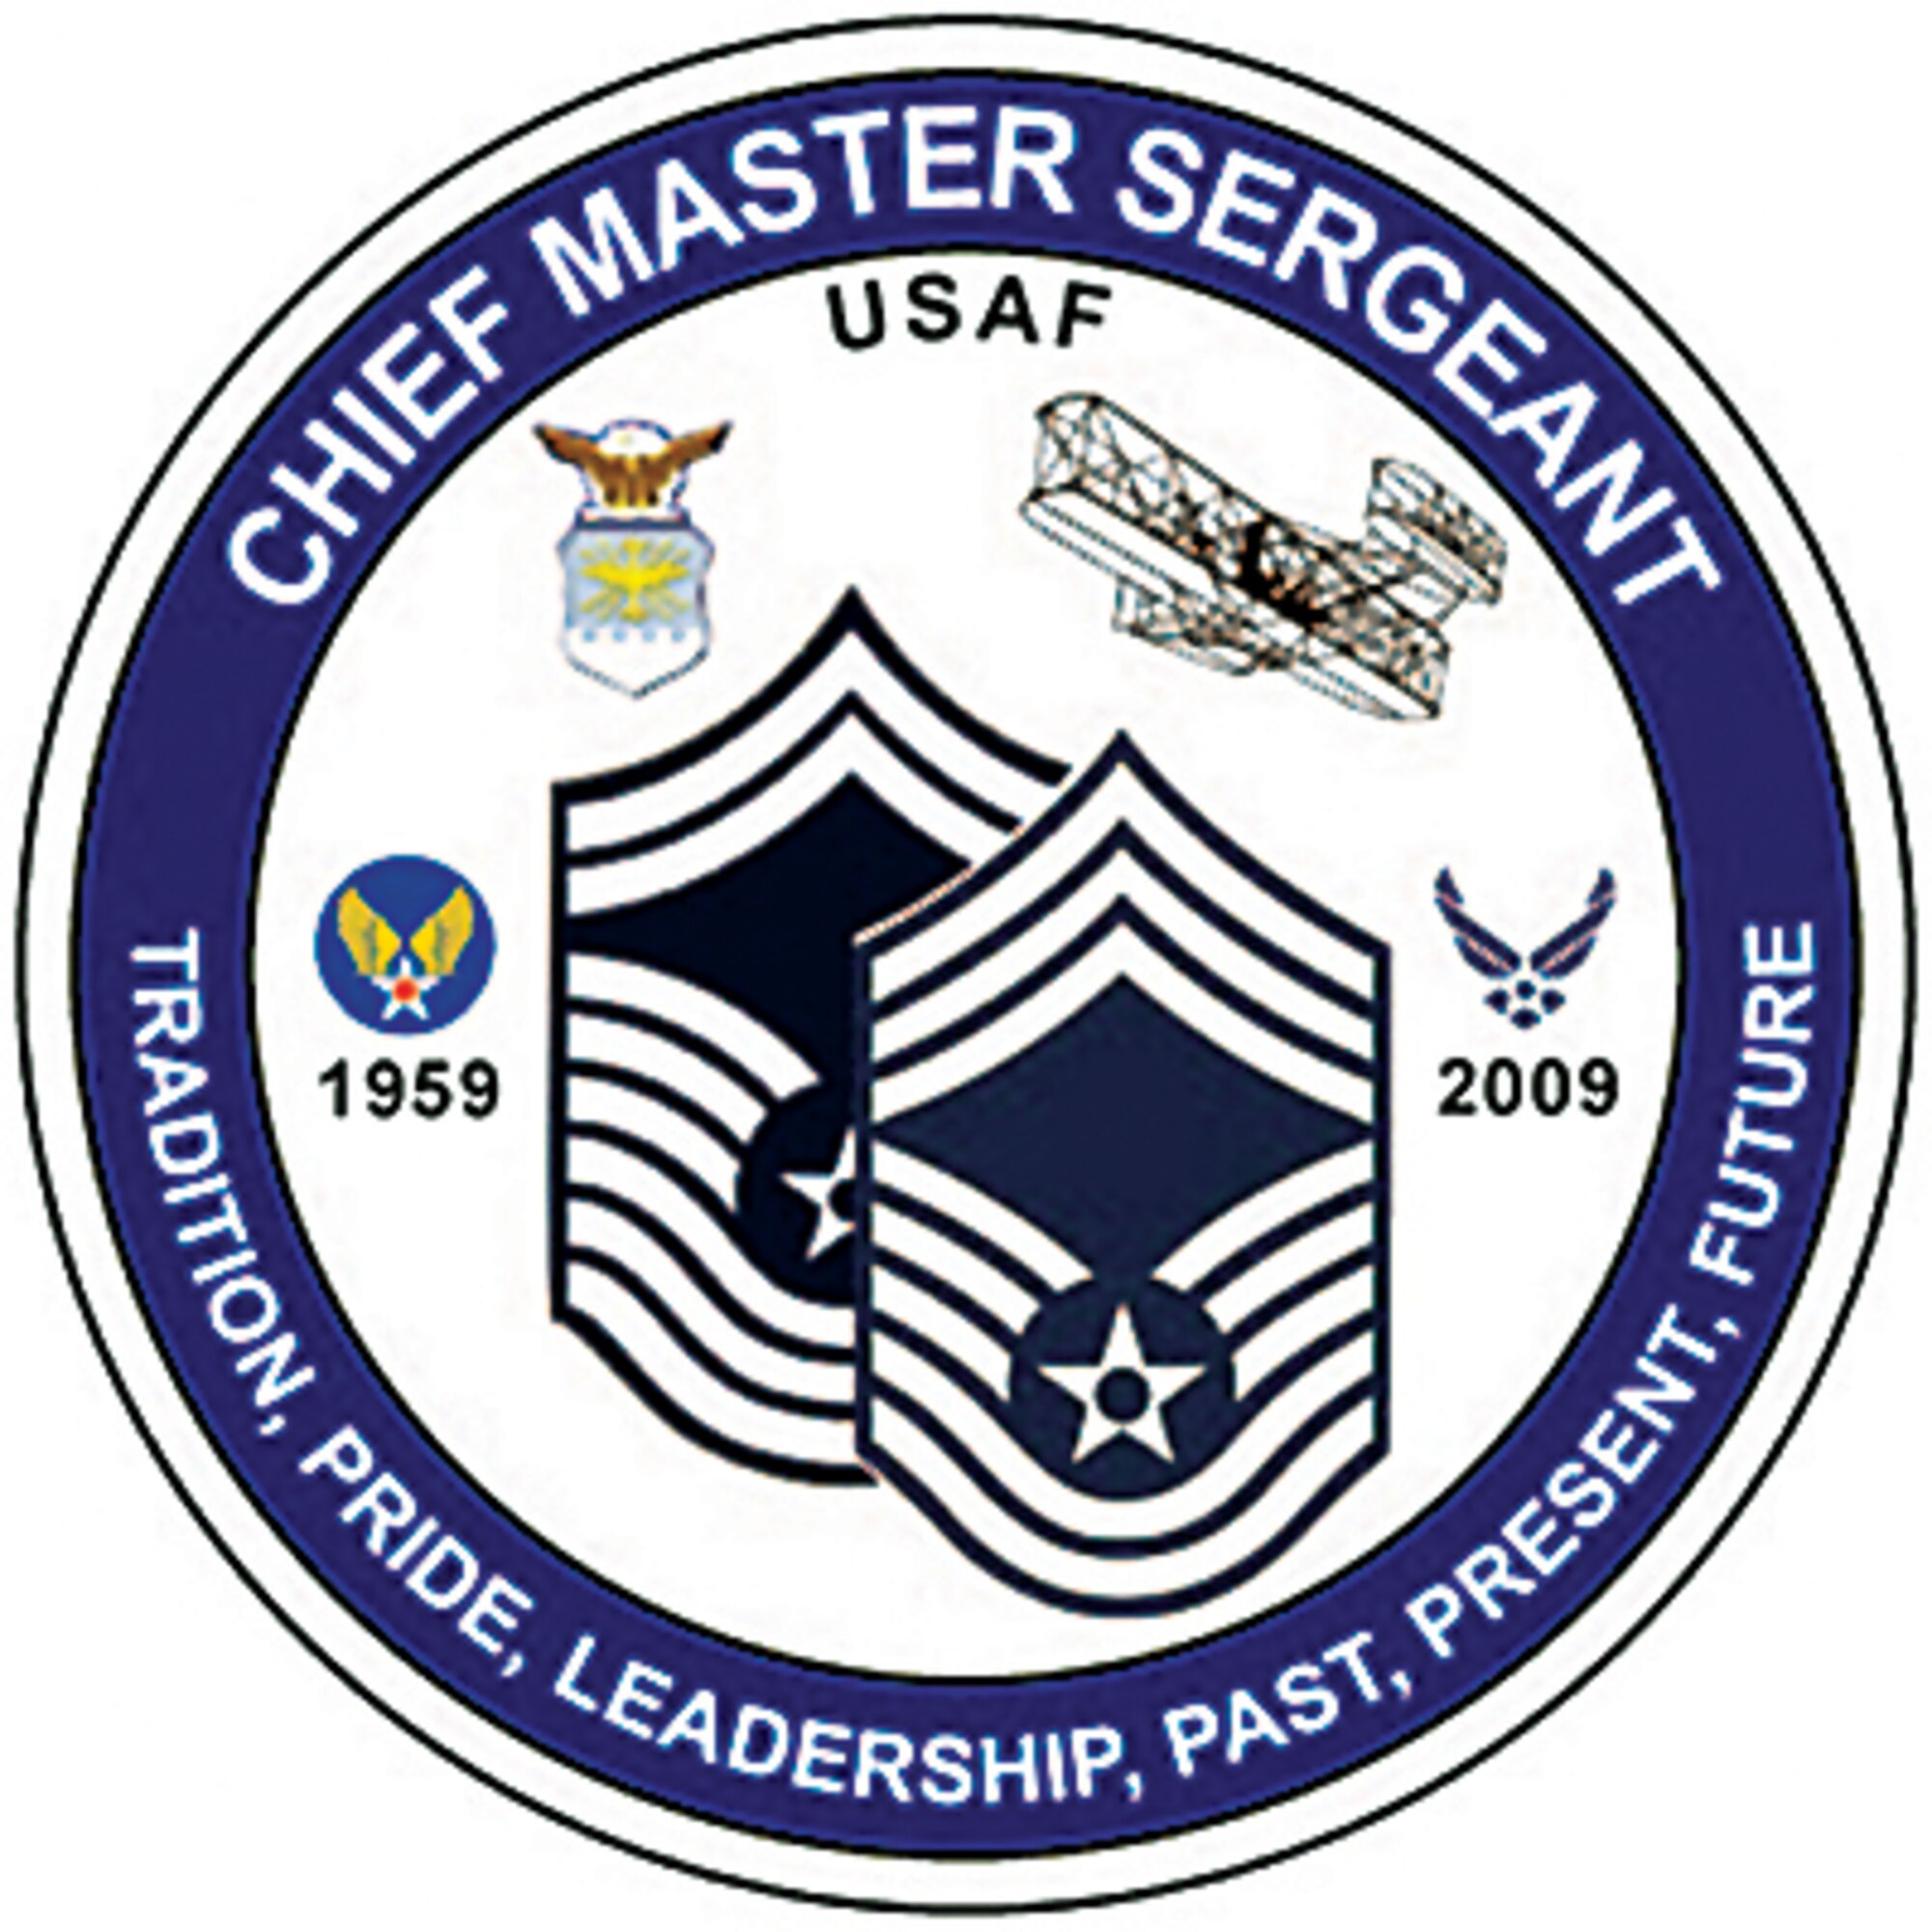 This coin commemorates the 50th anniversary of the rank of chief master sergeant. It will be handed out at the National Museum of the United States Air Force during a Dec. 1 event celebrating the anniversary.